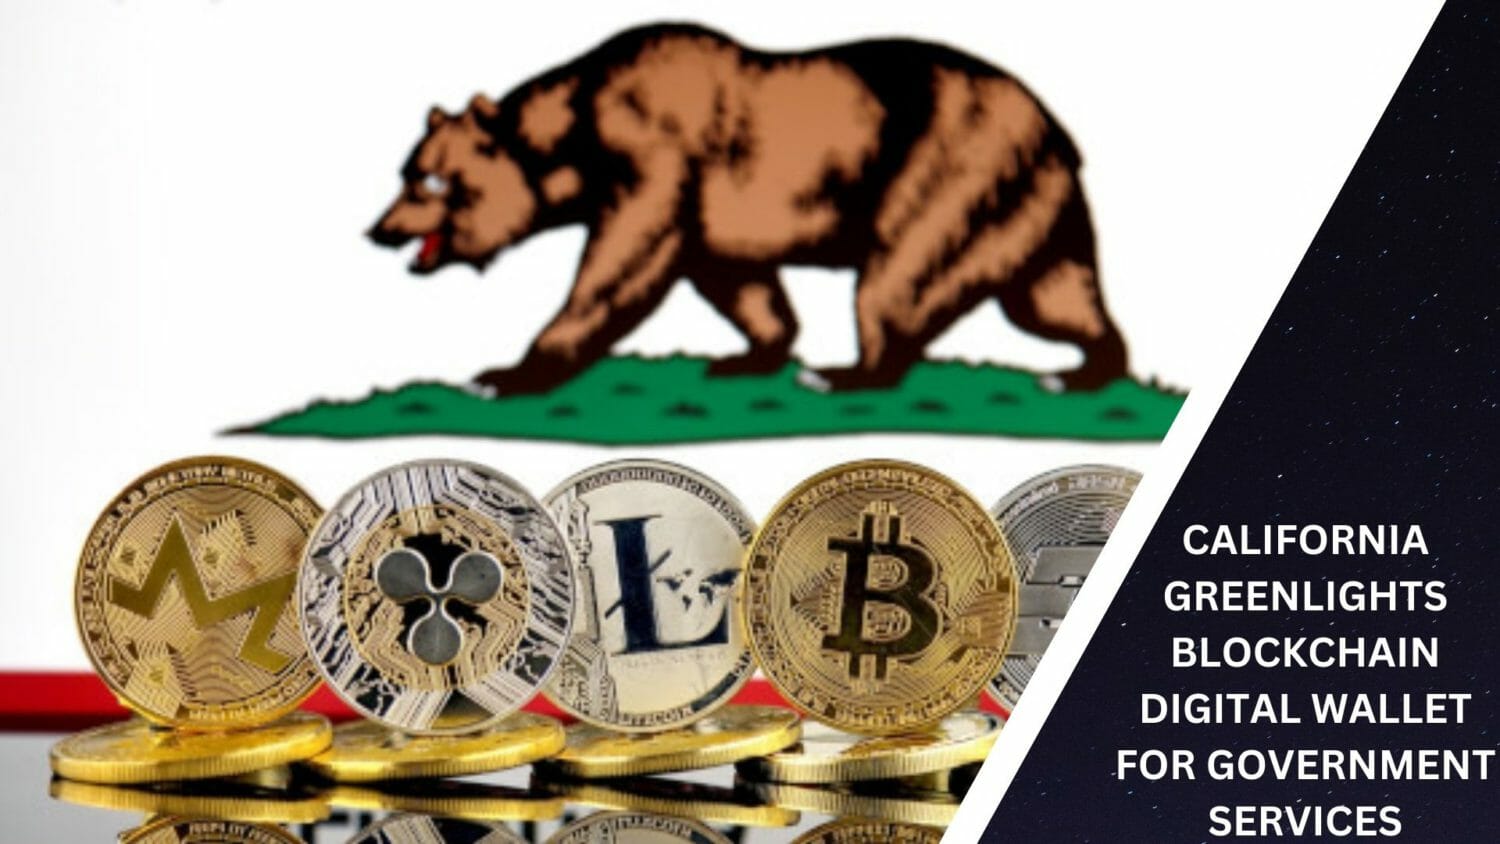 California Greenlights Blockchain Digital Wallet For Government Services